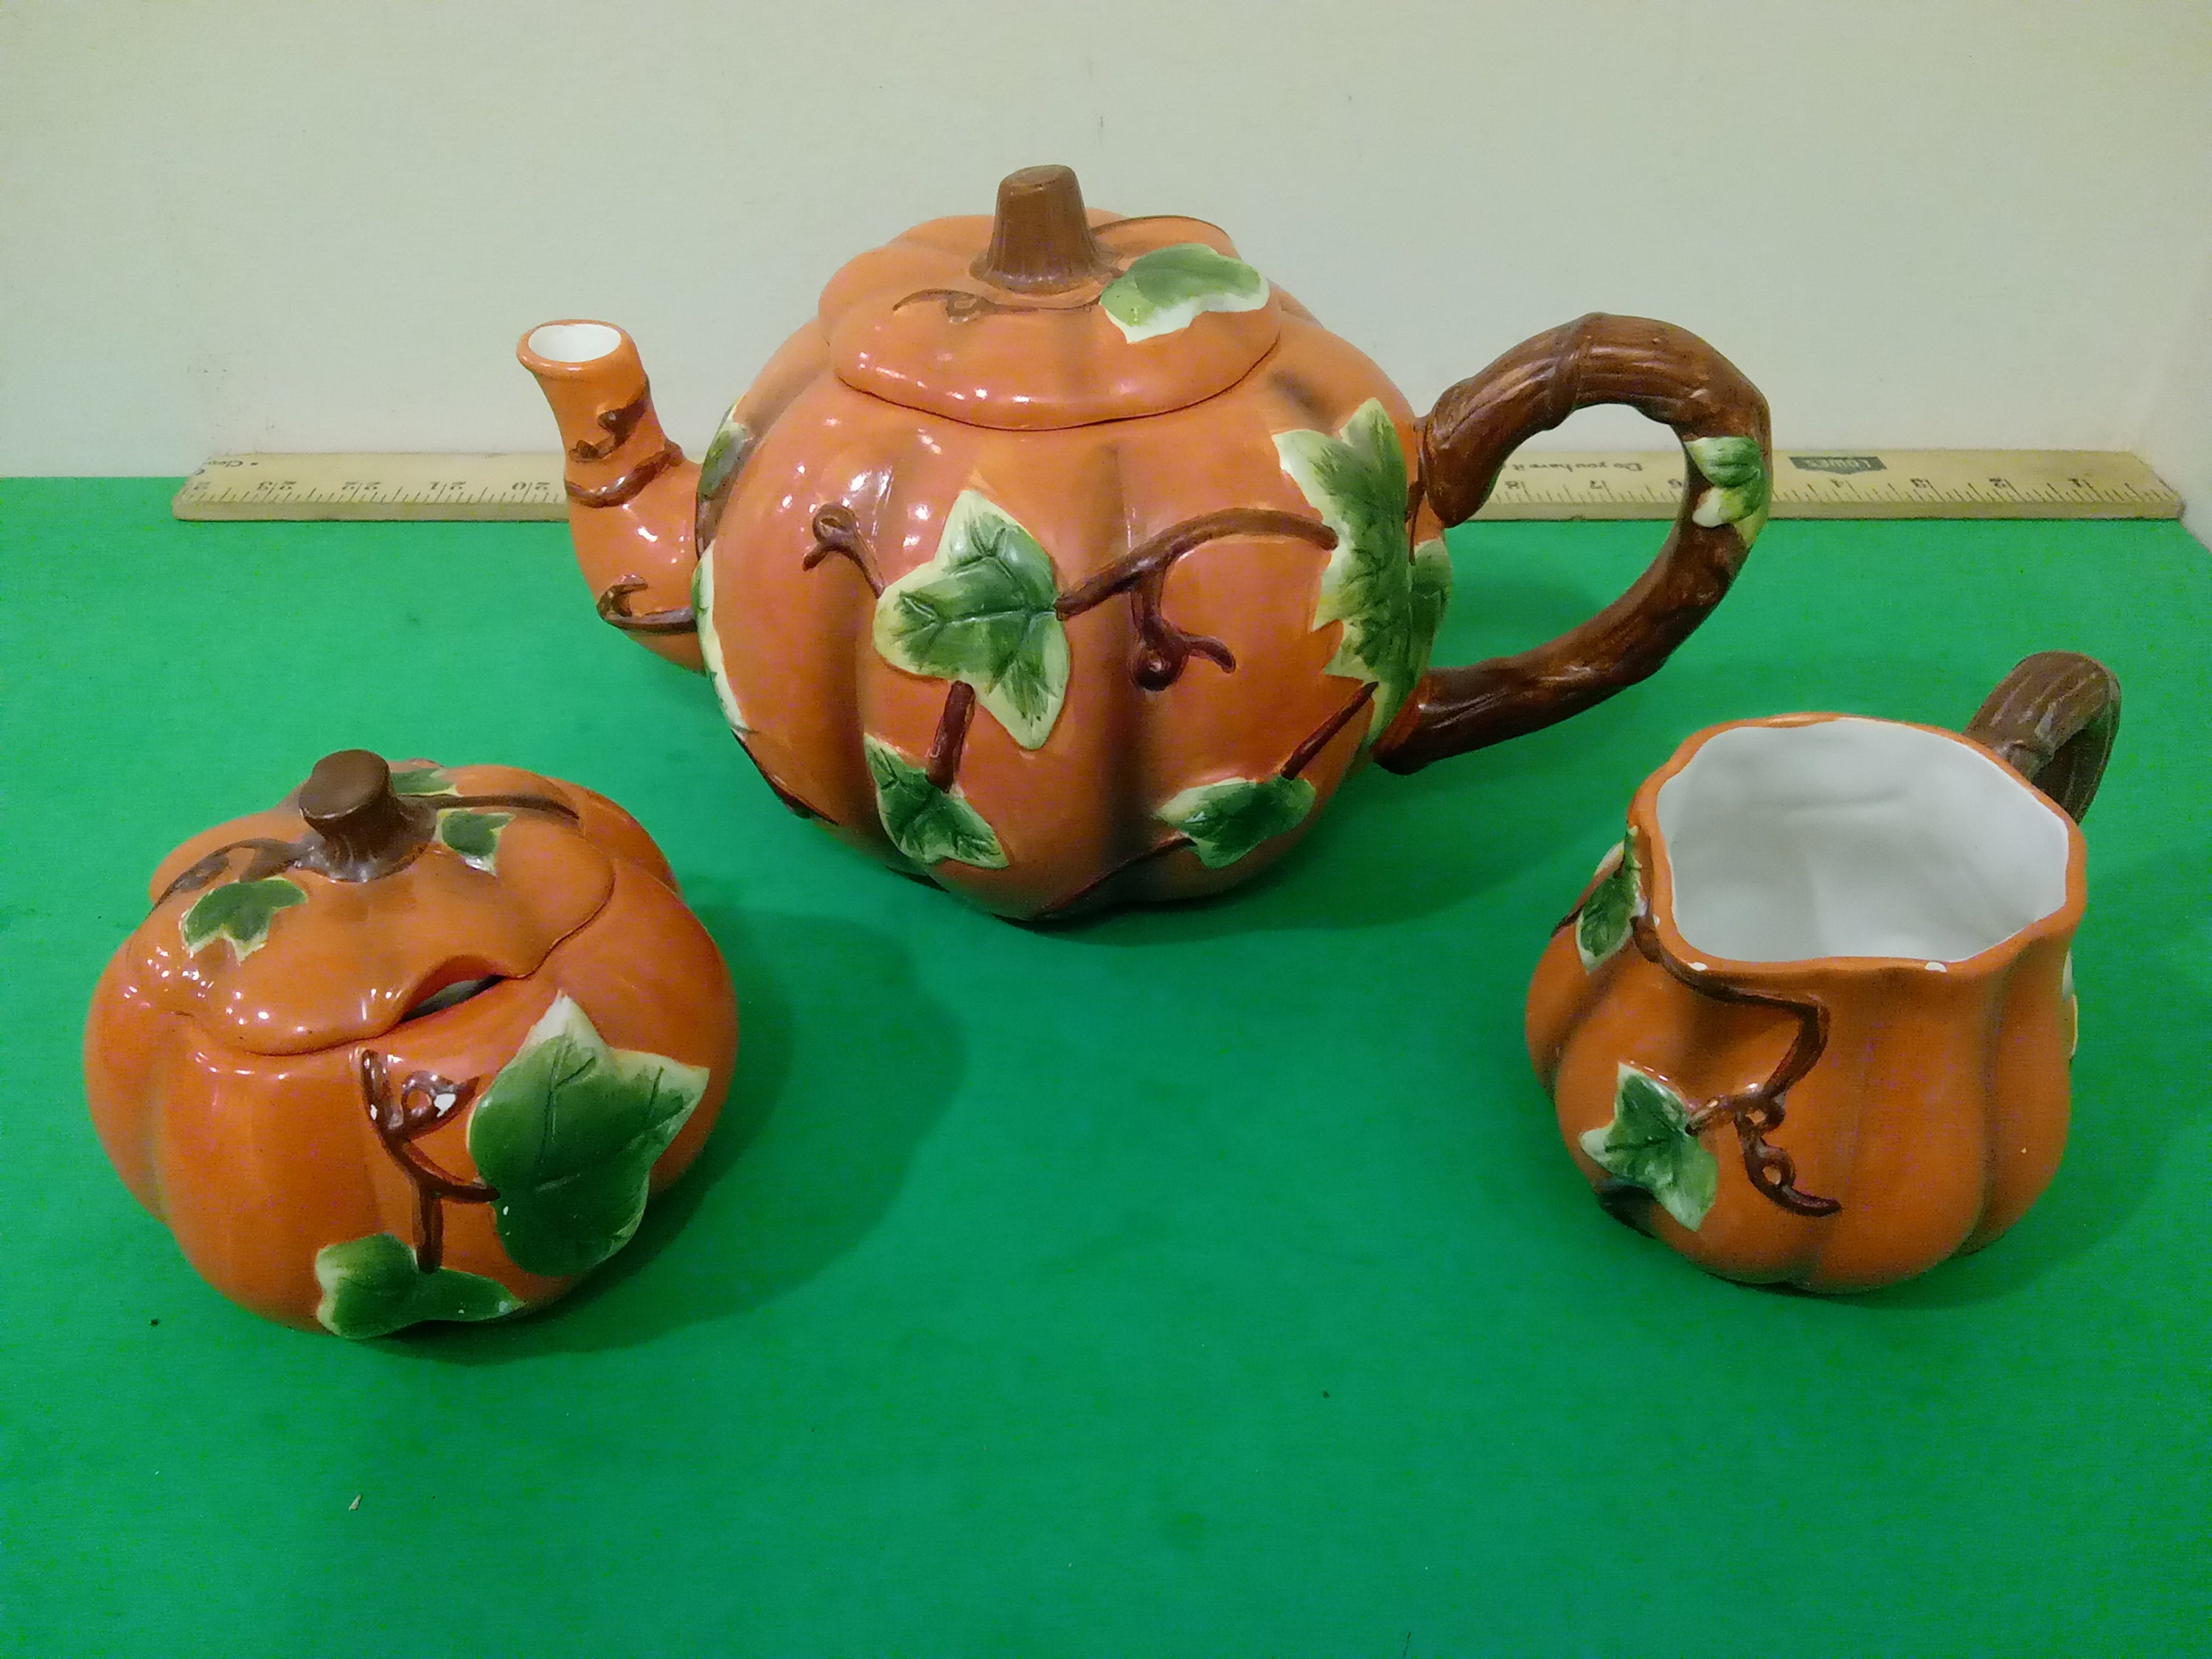 Dezin Electric Kettle and Teapot - Roller Auctions